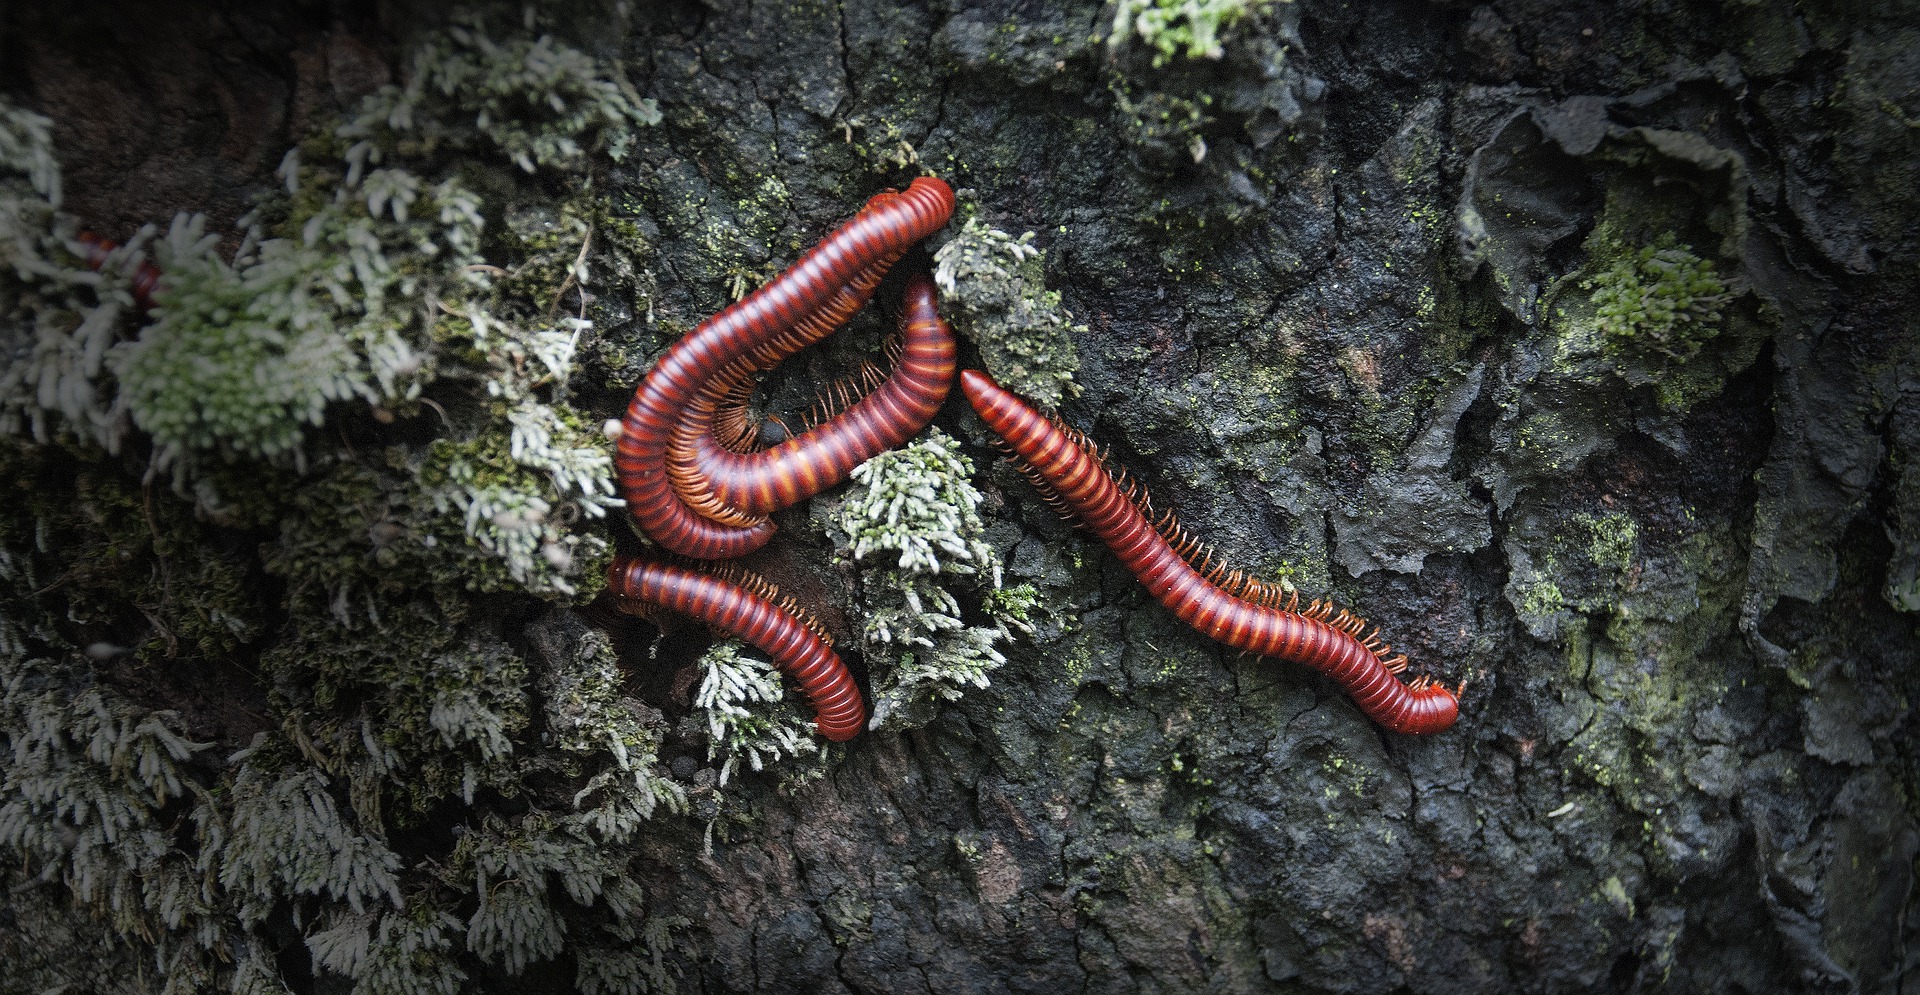 Multiple red giant millipedes